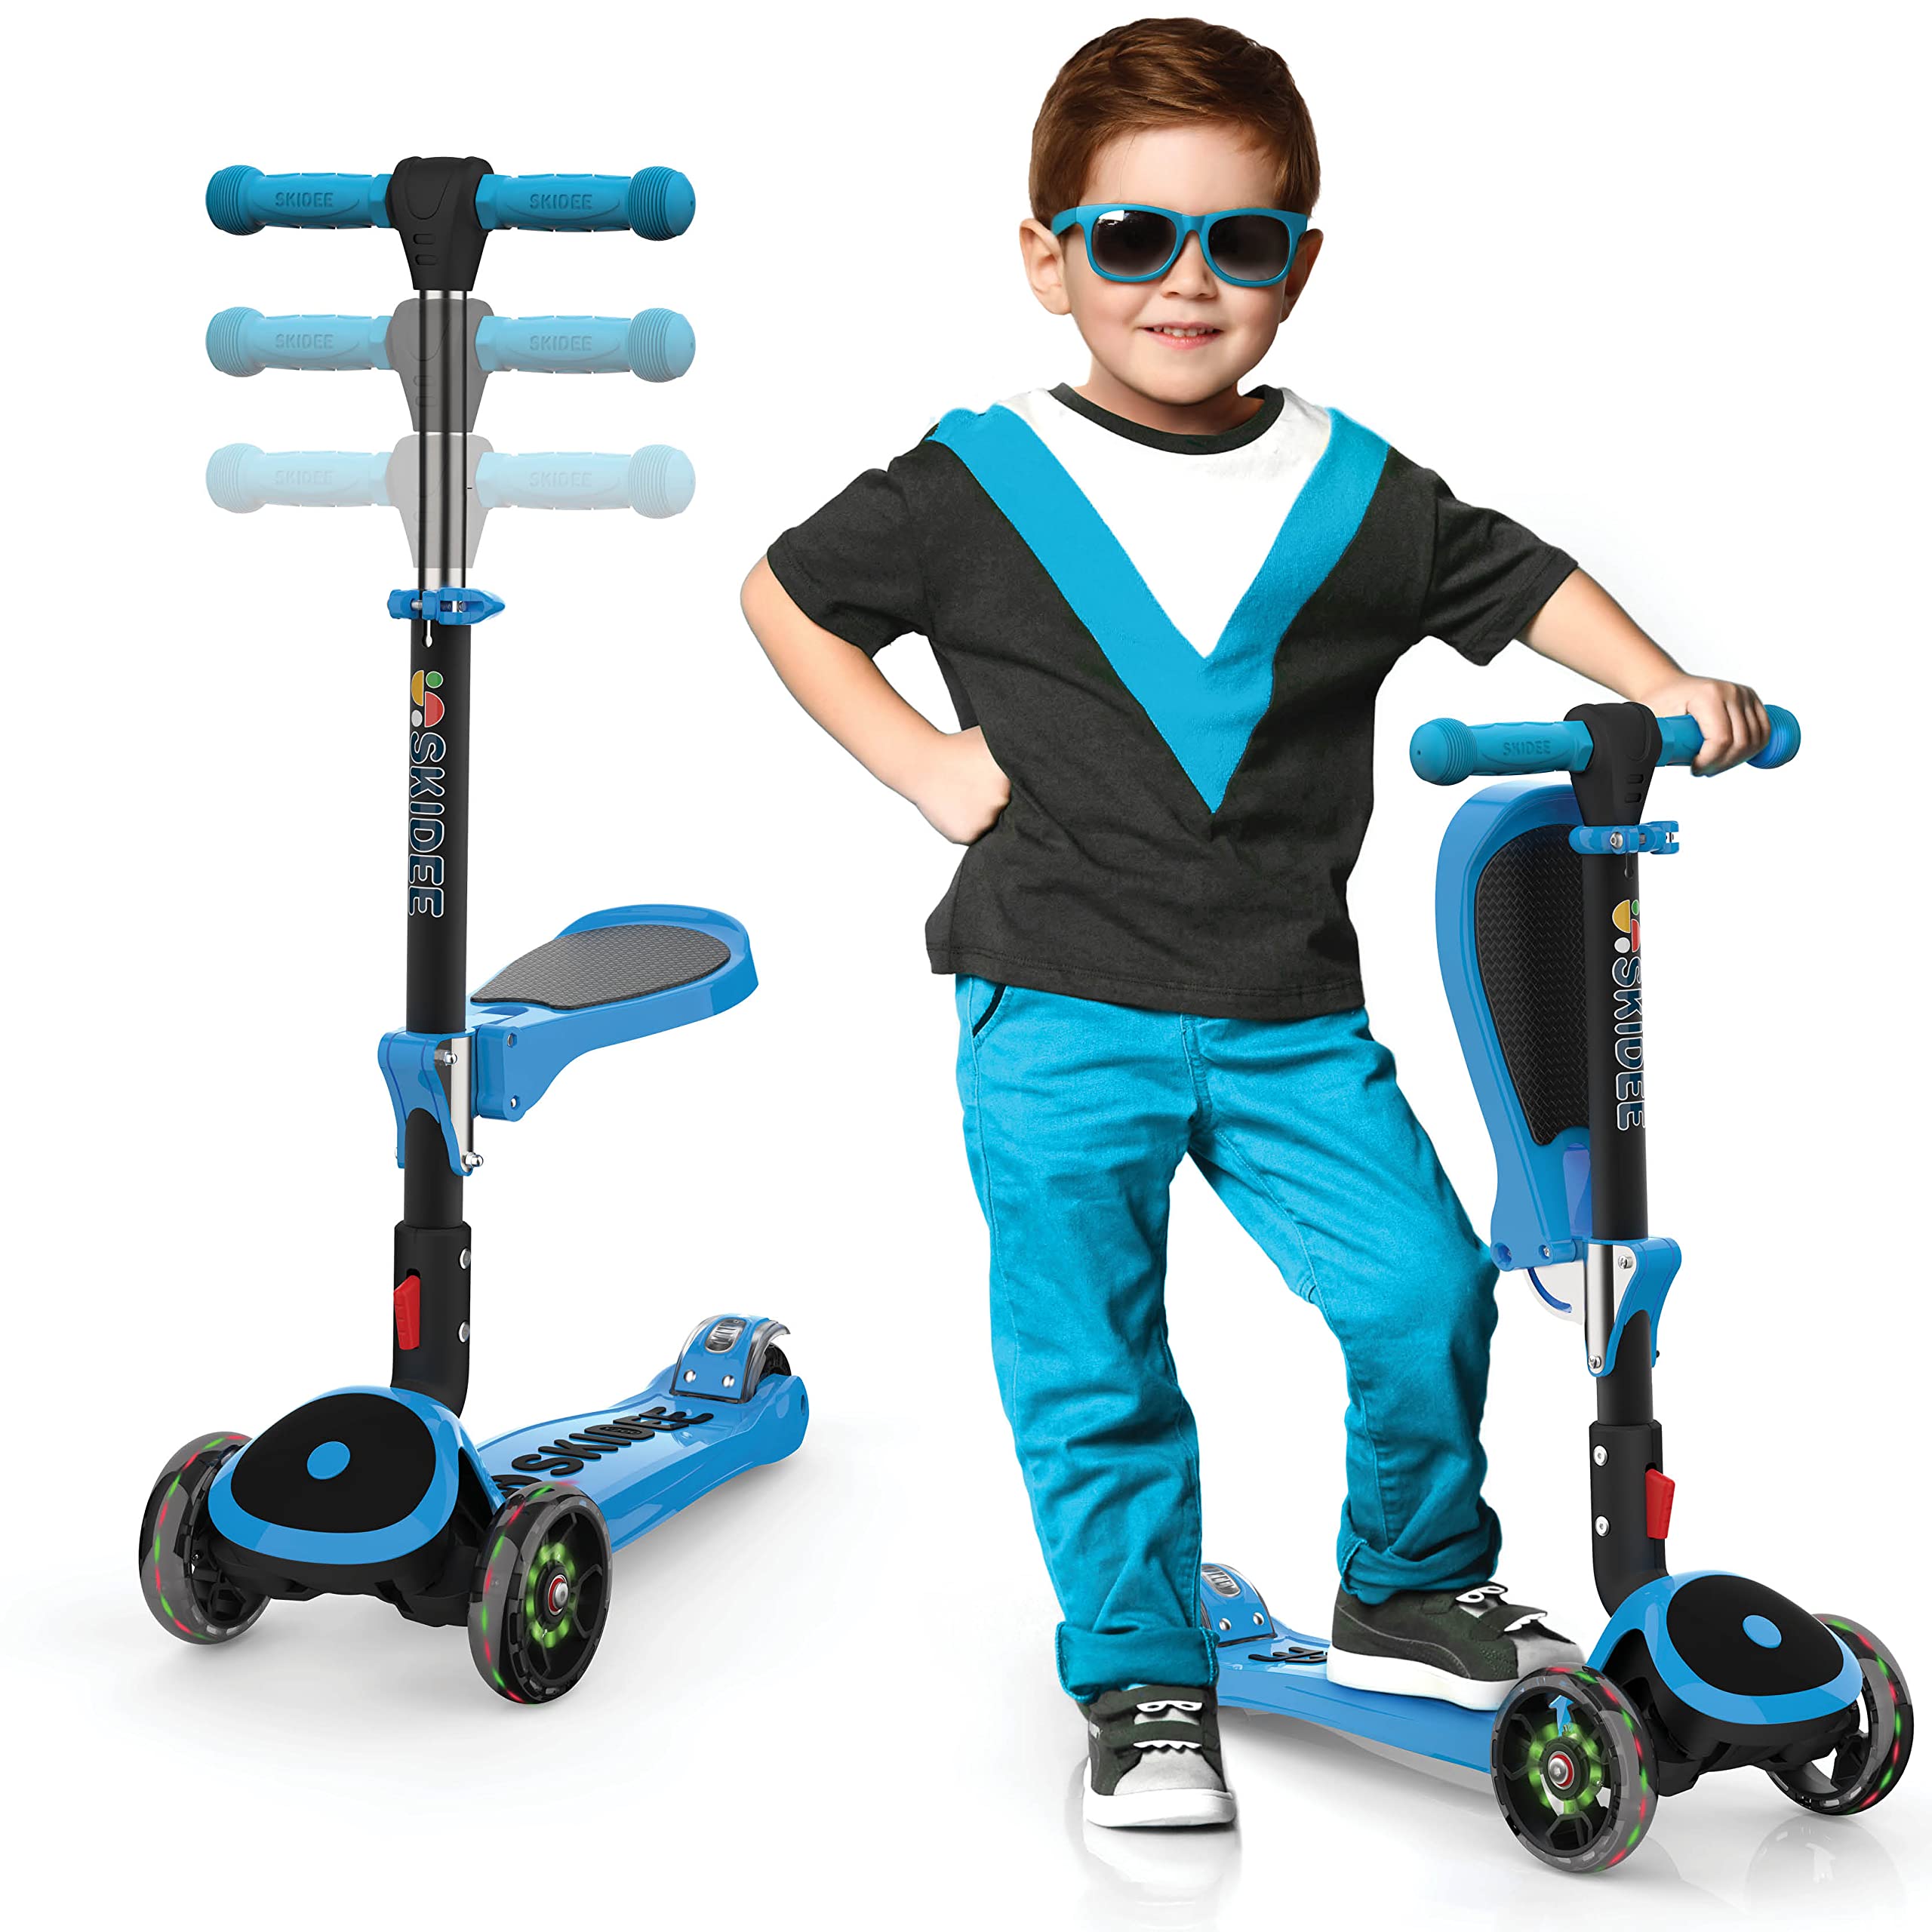 Skidee Toddler Scooter